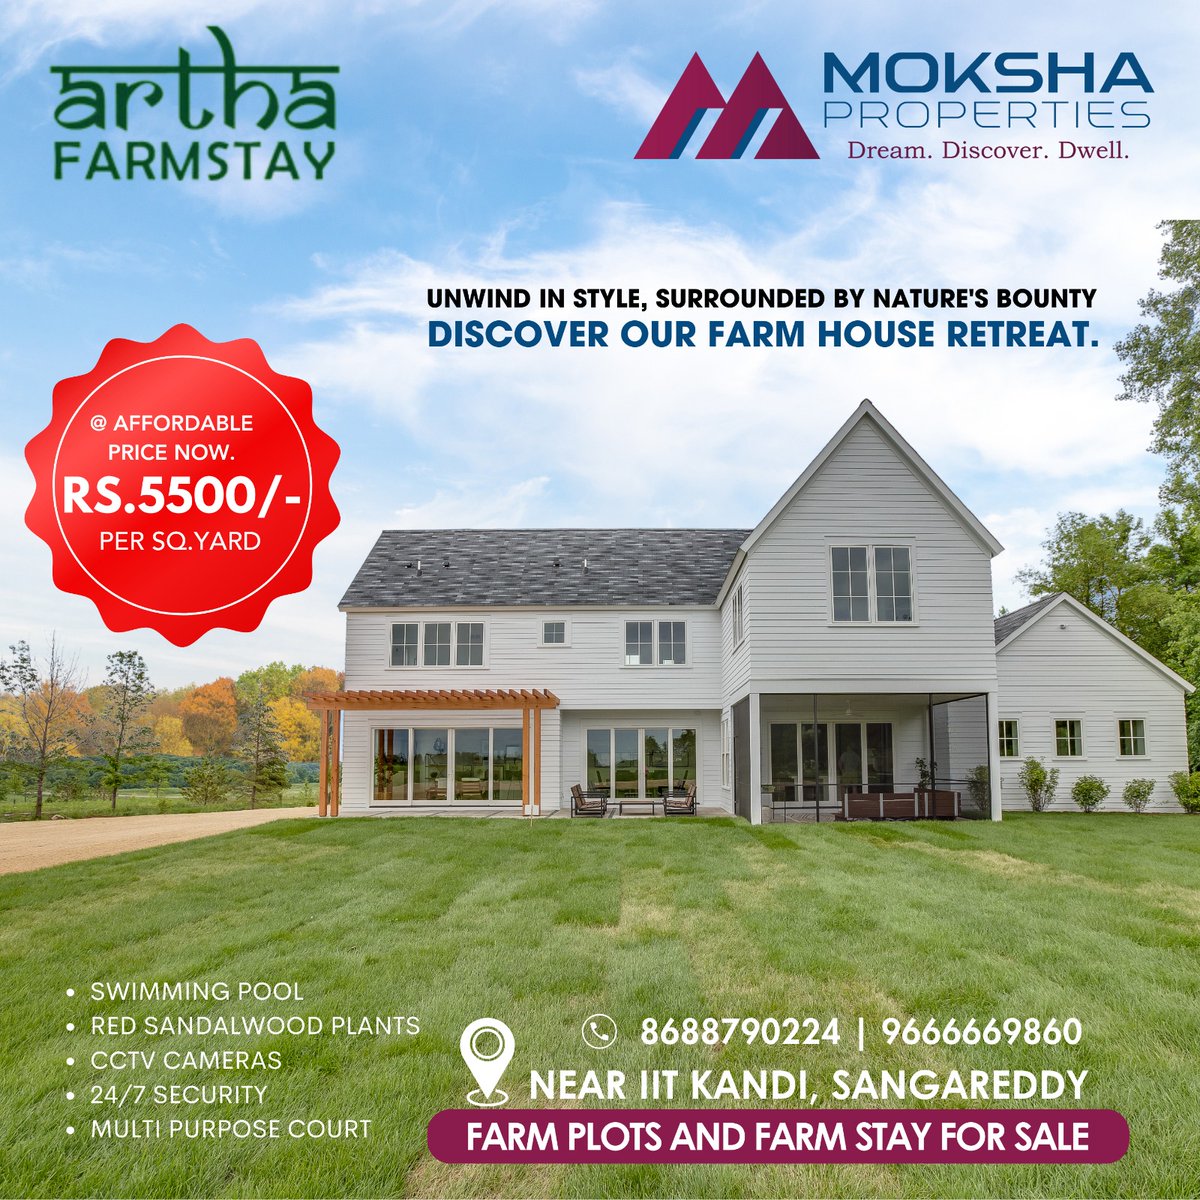 Escape the hustle and bustle of the city and immerse yourself in the tranquility of our farm stay and farmhouse retreat!

#mokshaproperties #FarmhouseForSale #TranquilLiving #AffordableLuxury #residentialplotsforsalenearme #openlandforsalenearme #commercialplotforsalenearme